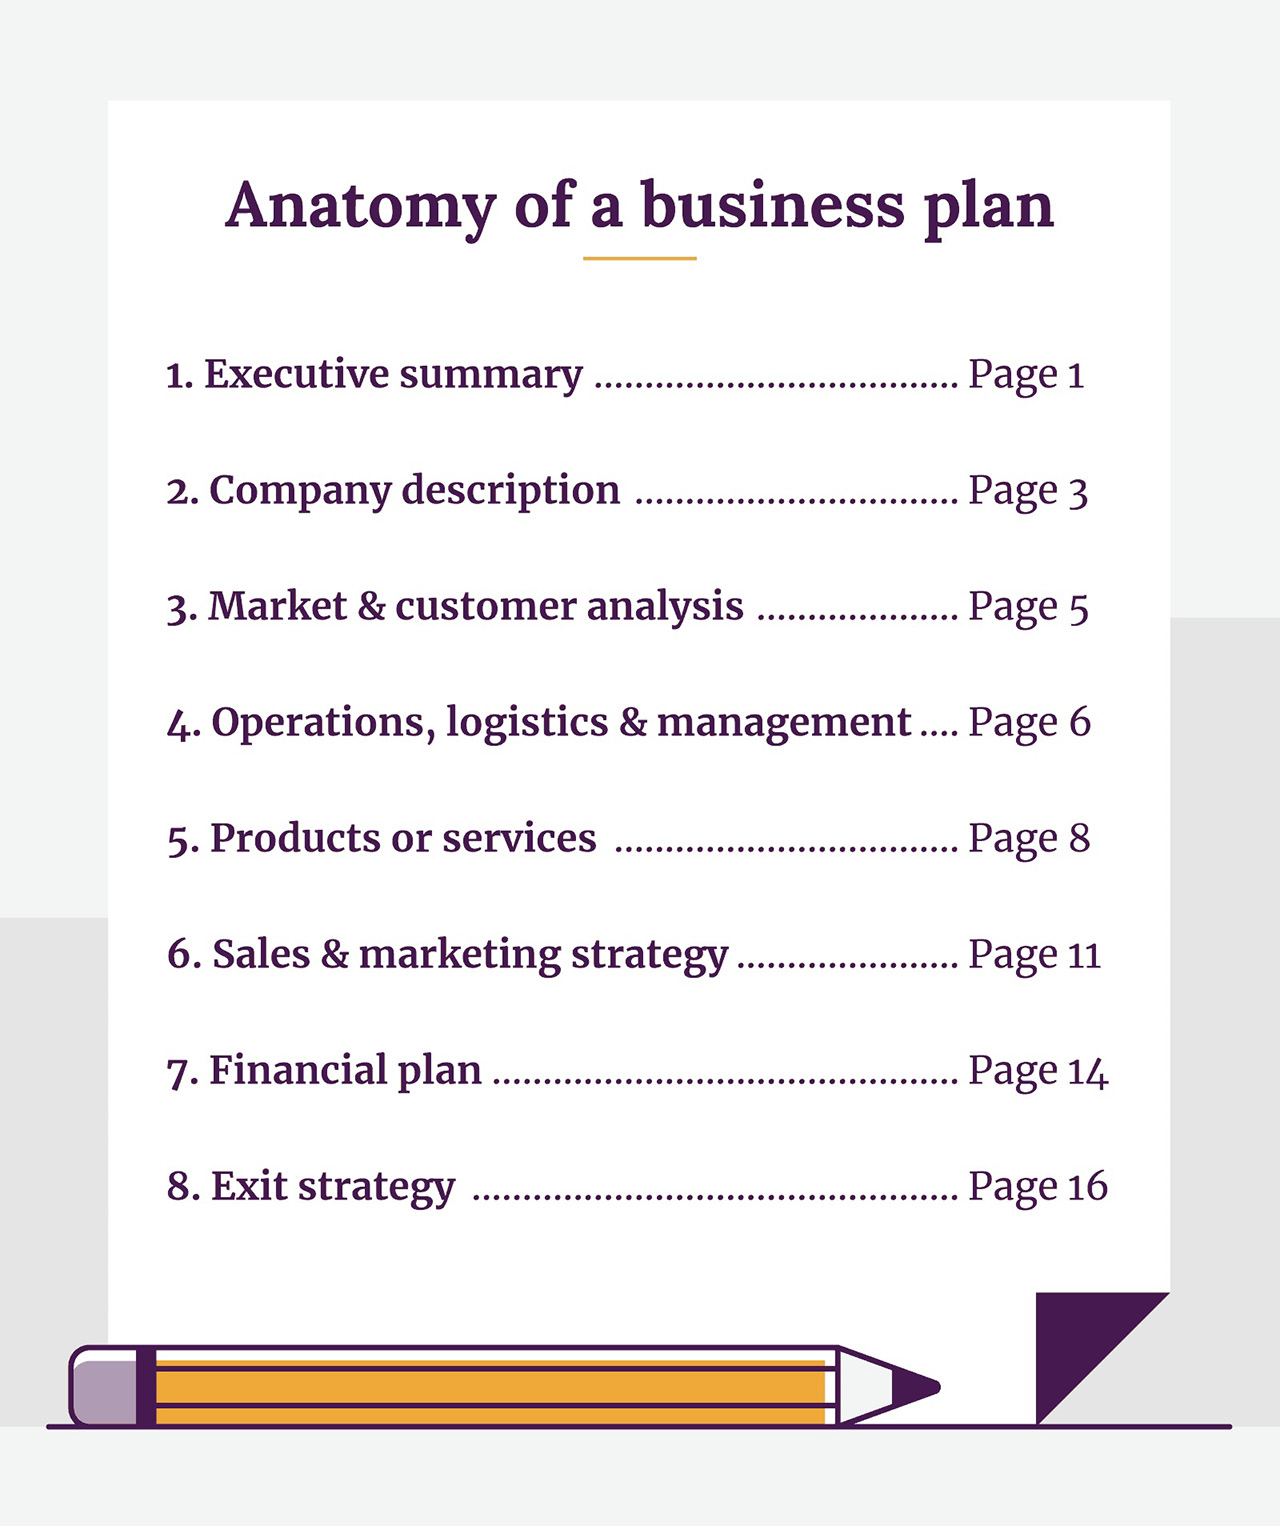 which part of the business plan may be omitted